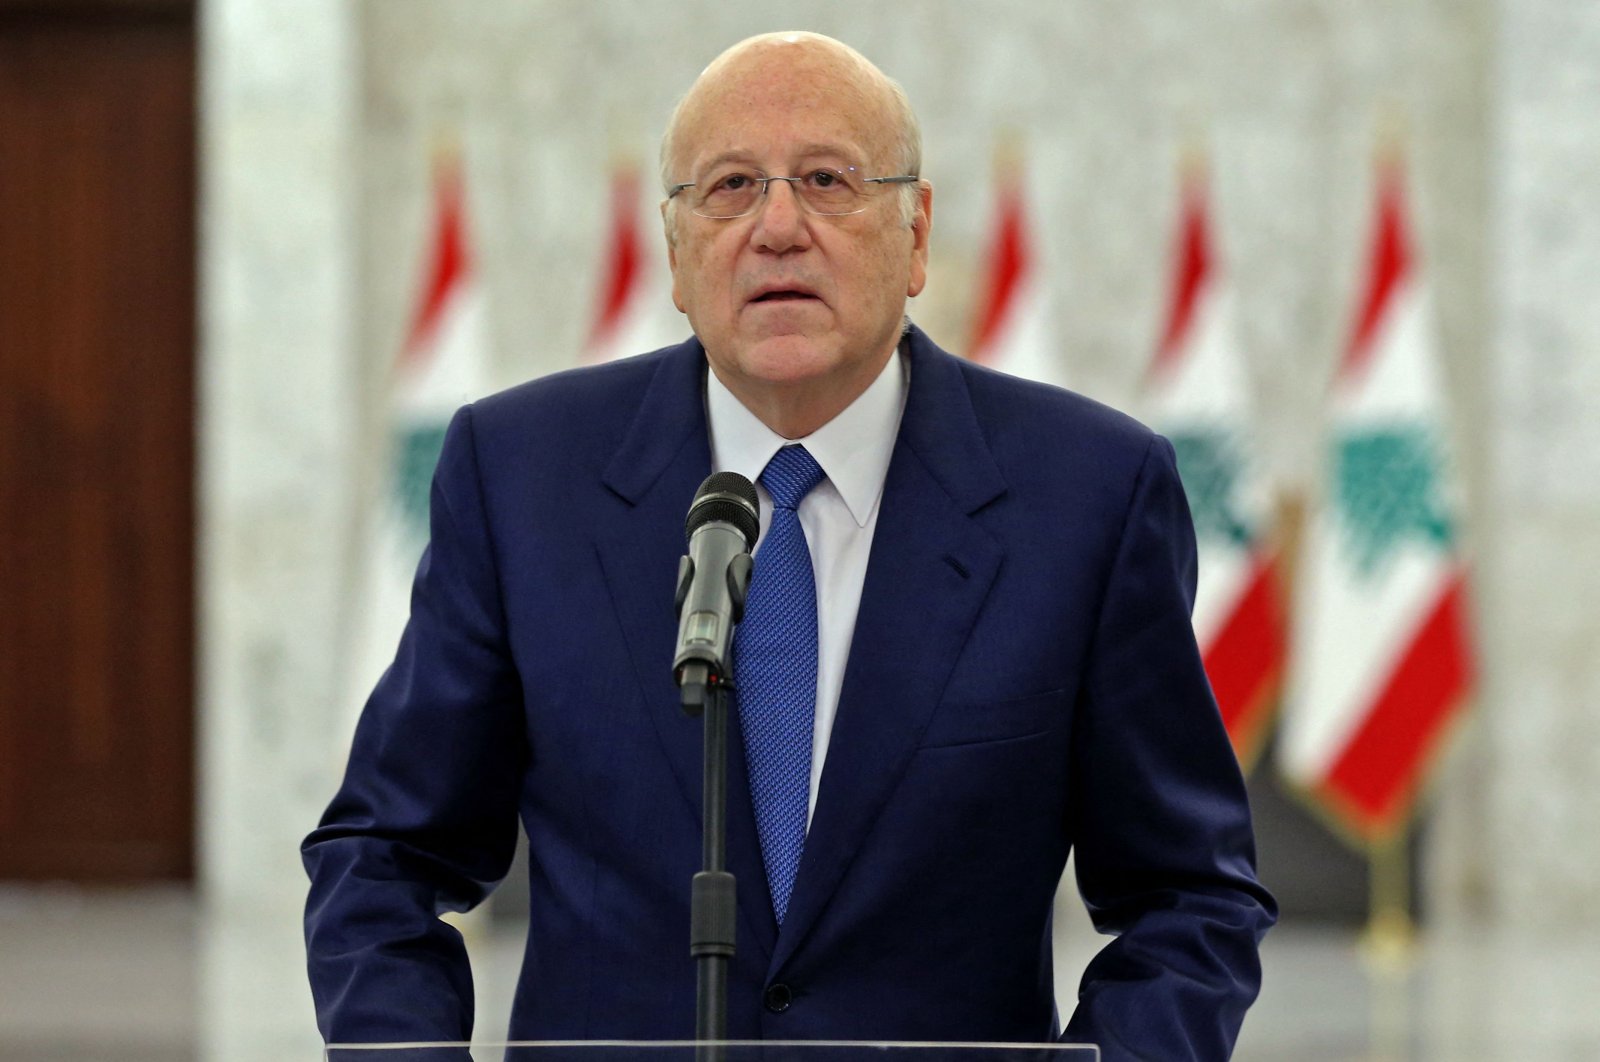 Prime Minister-designate Najib Mikati announcing the formation of a new Lebanese government after a meeting with the President at the presidential palace in Baabda, east of the capital, Beirut, Lebanon, Sept. 10, 2021. (Photo by Dalati and Nohra via AFP)